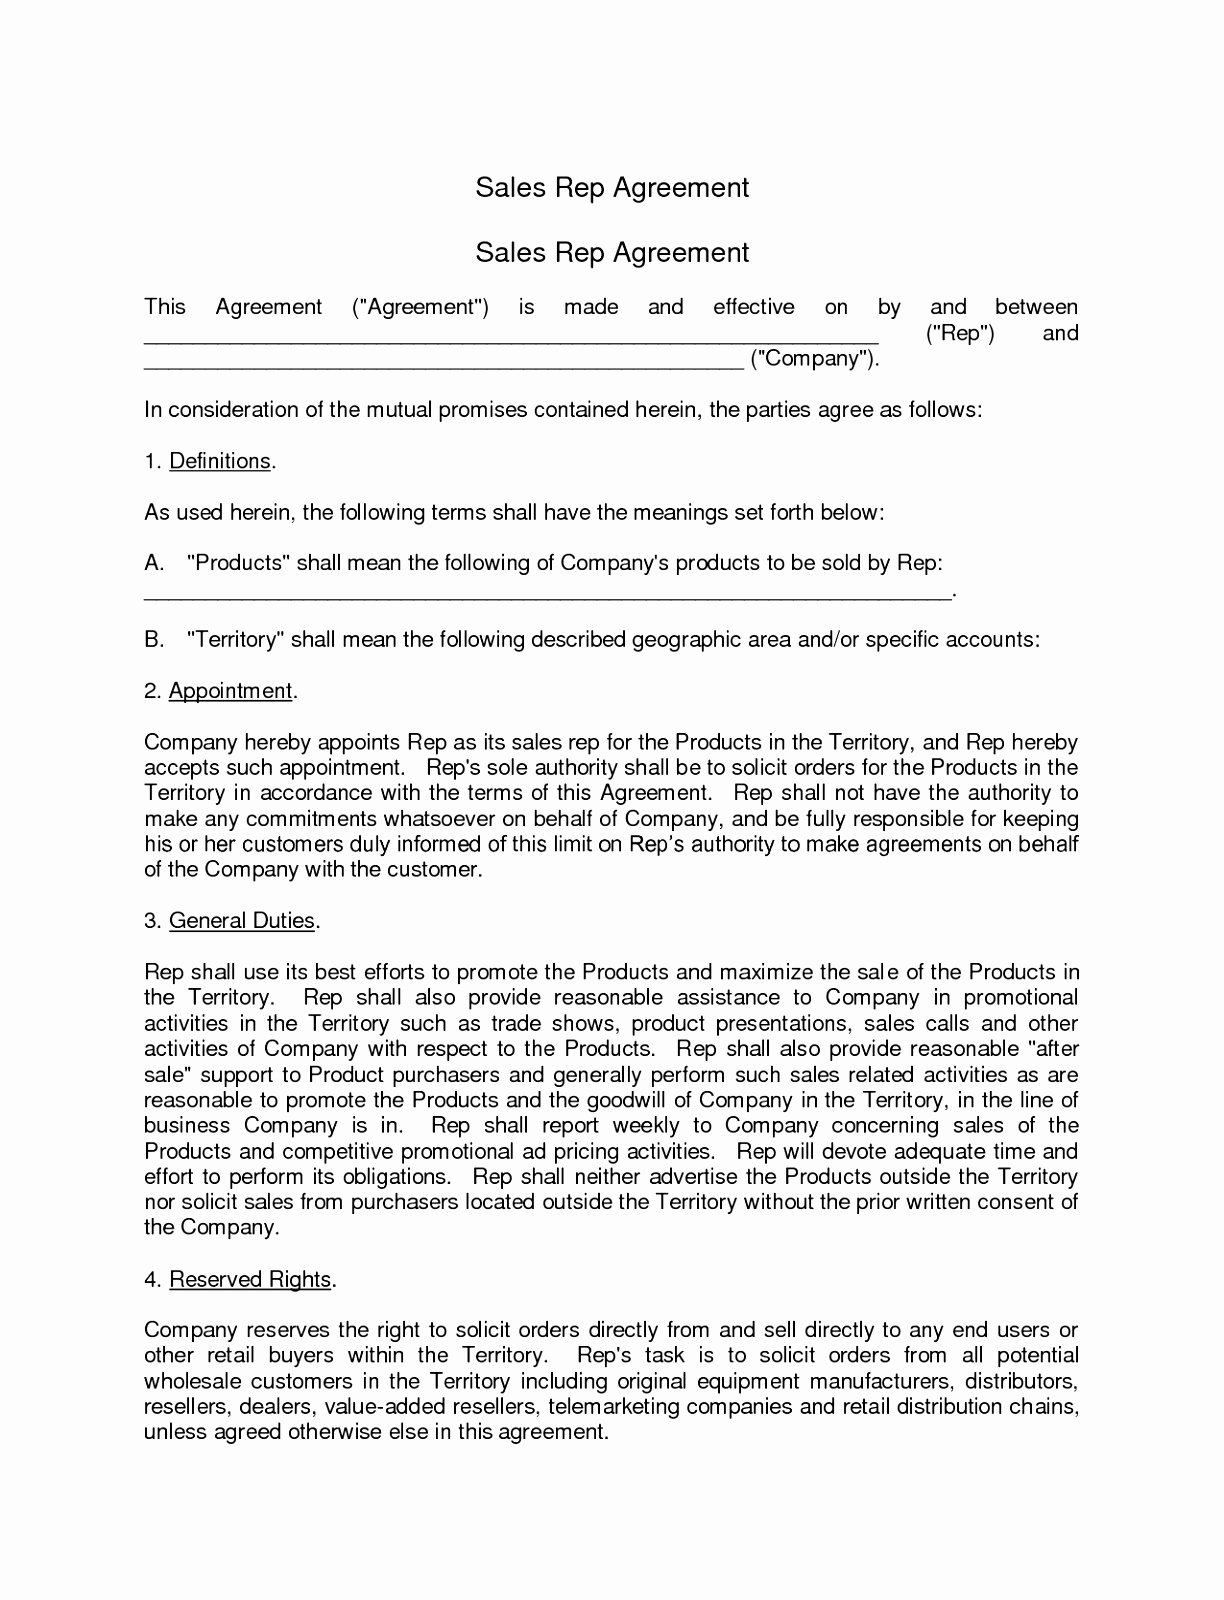 Sales Representation Agreement Template Awesome Luxury Printable Sample